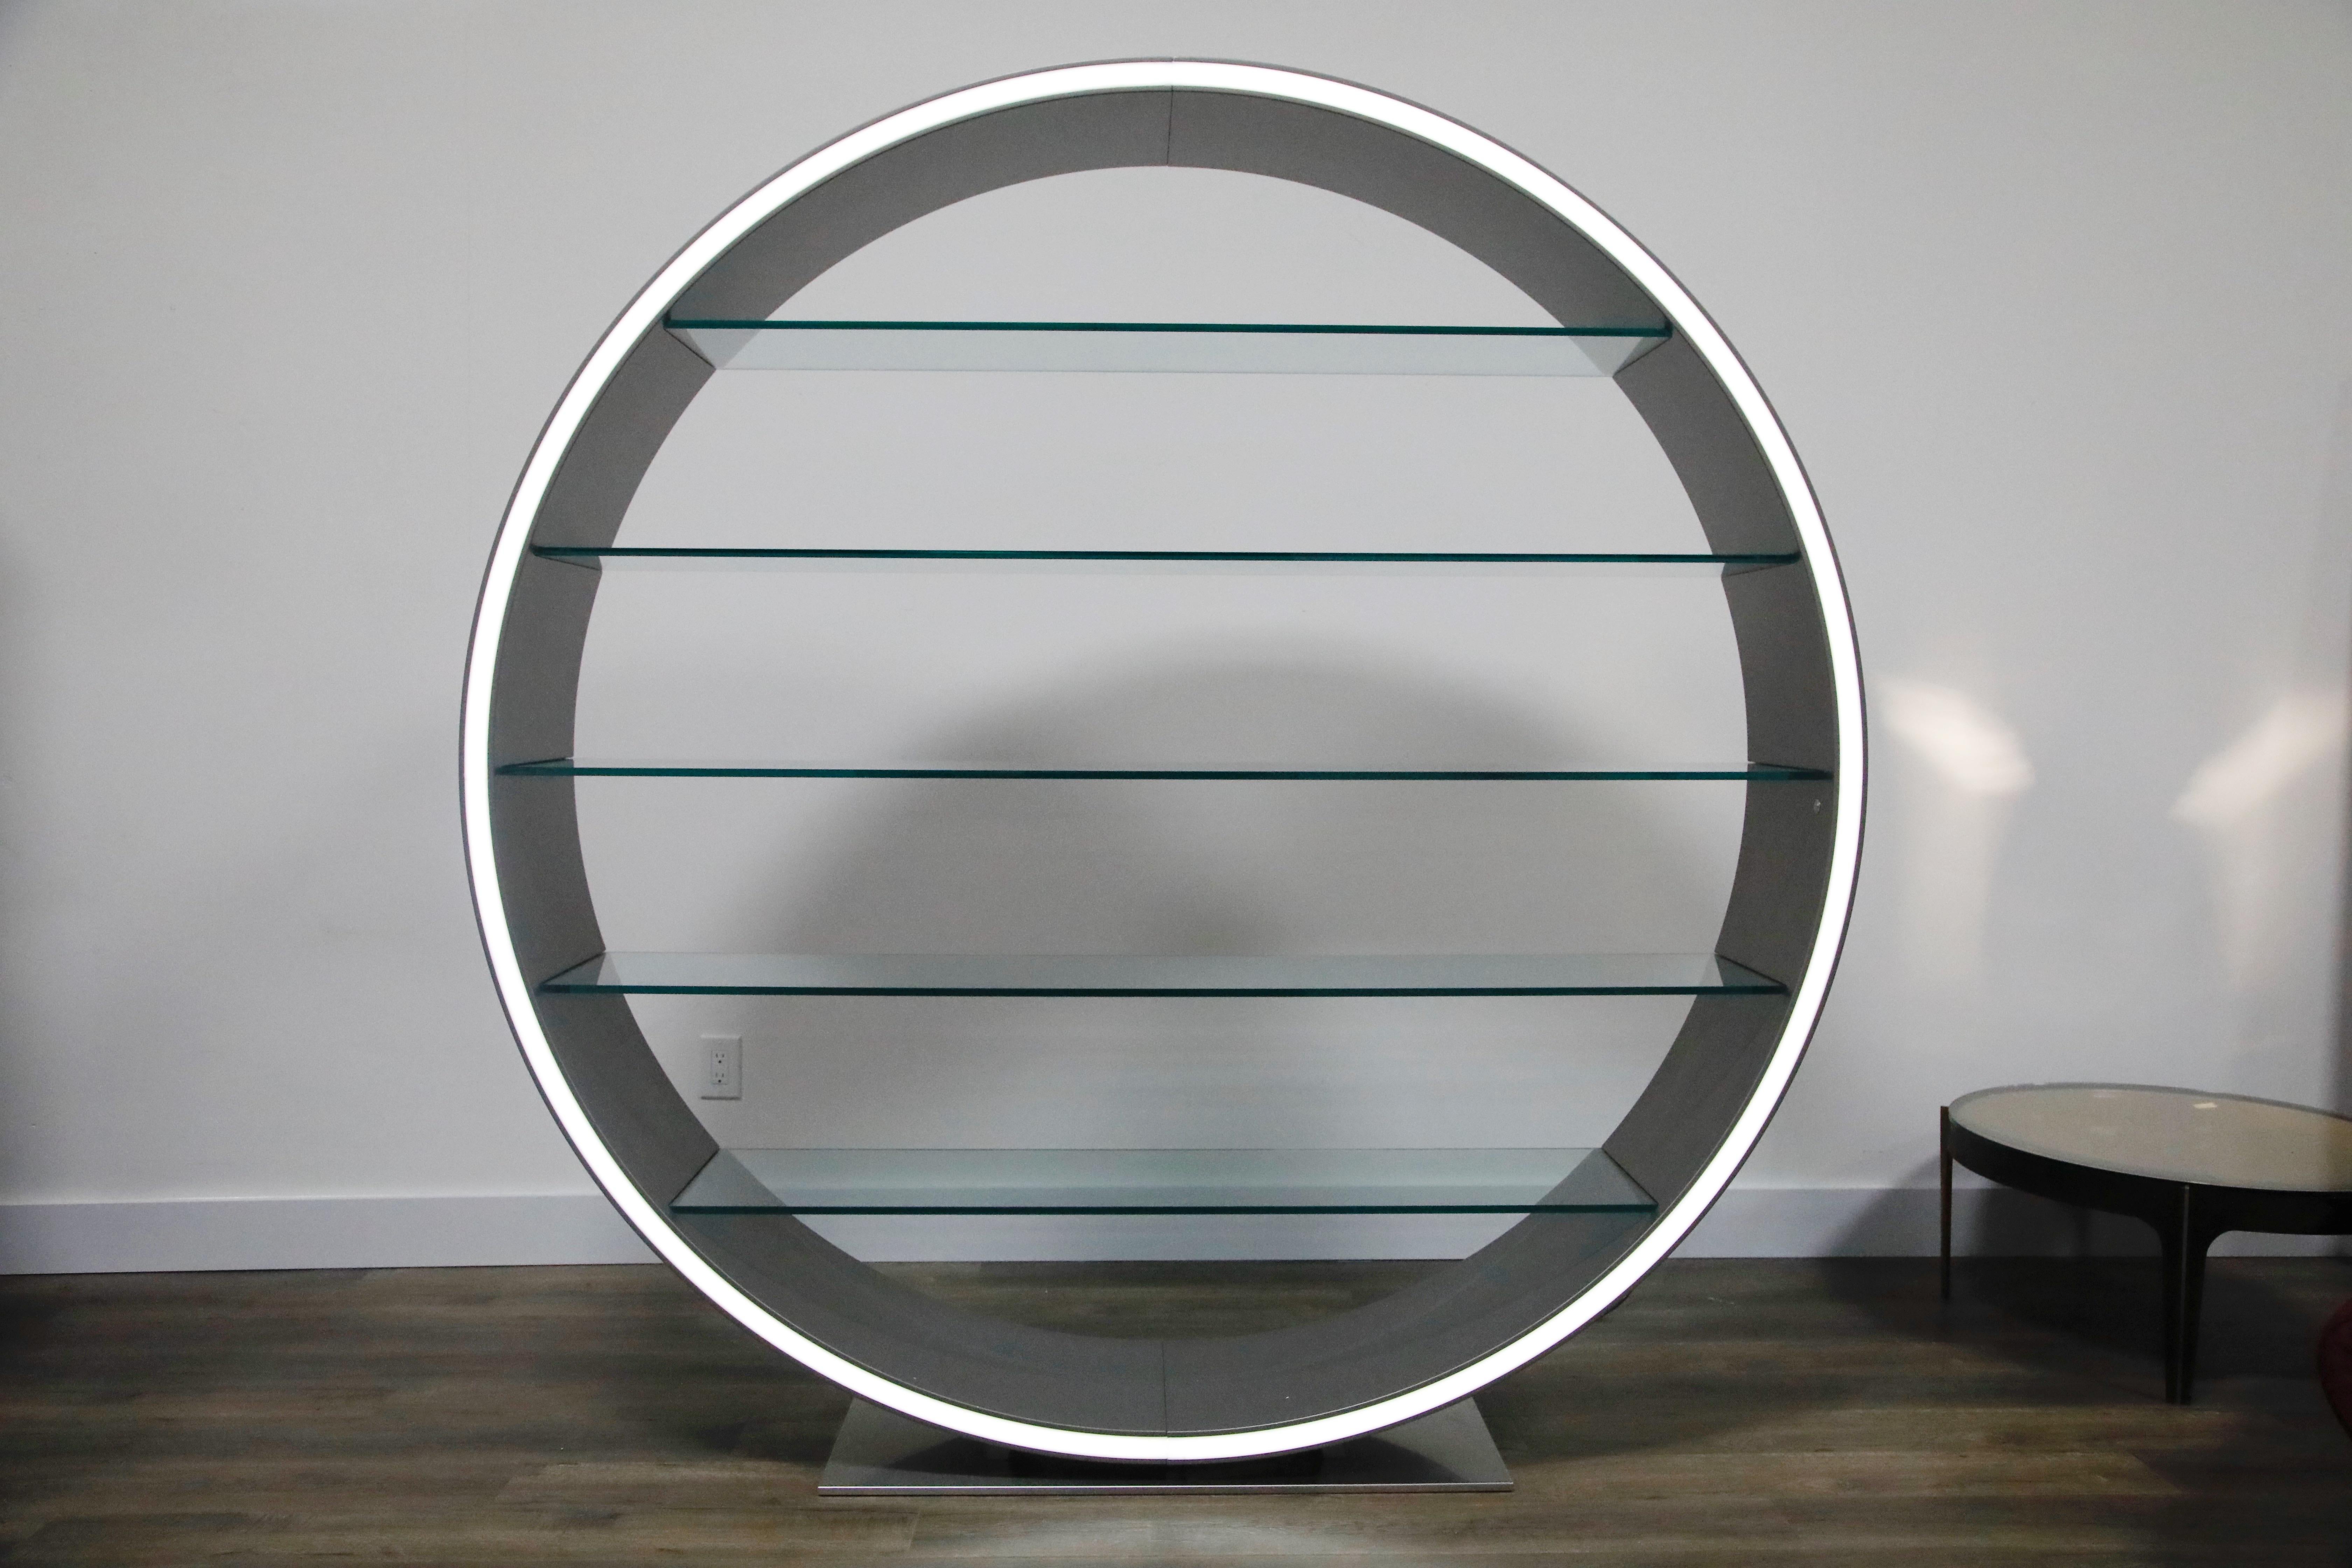 This phenomenal 'Omega' bookcase designed by Daniel Rode for Roche Bobois (Paris) features a design that is a perfect circle set on a steel base with five clear glass shelves that are both functional and structural. There is no back to this modern